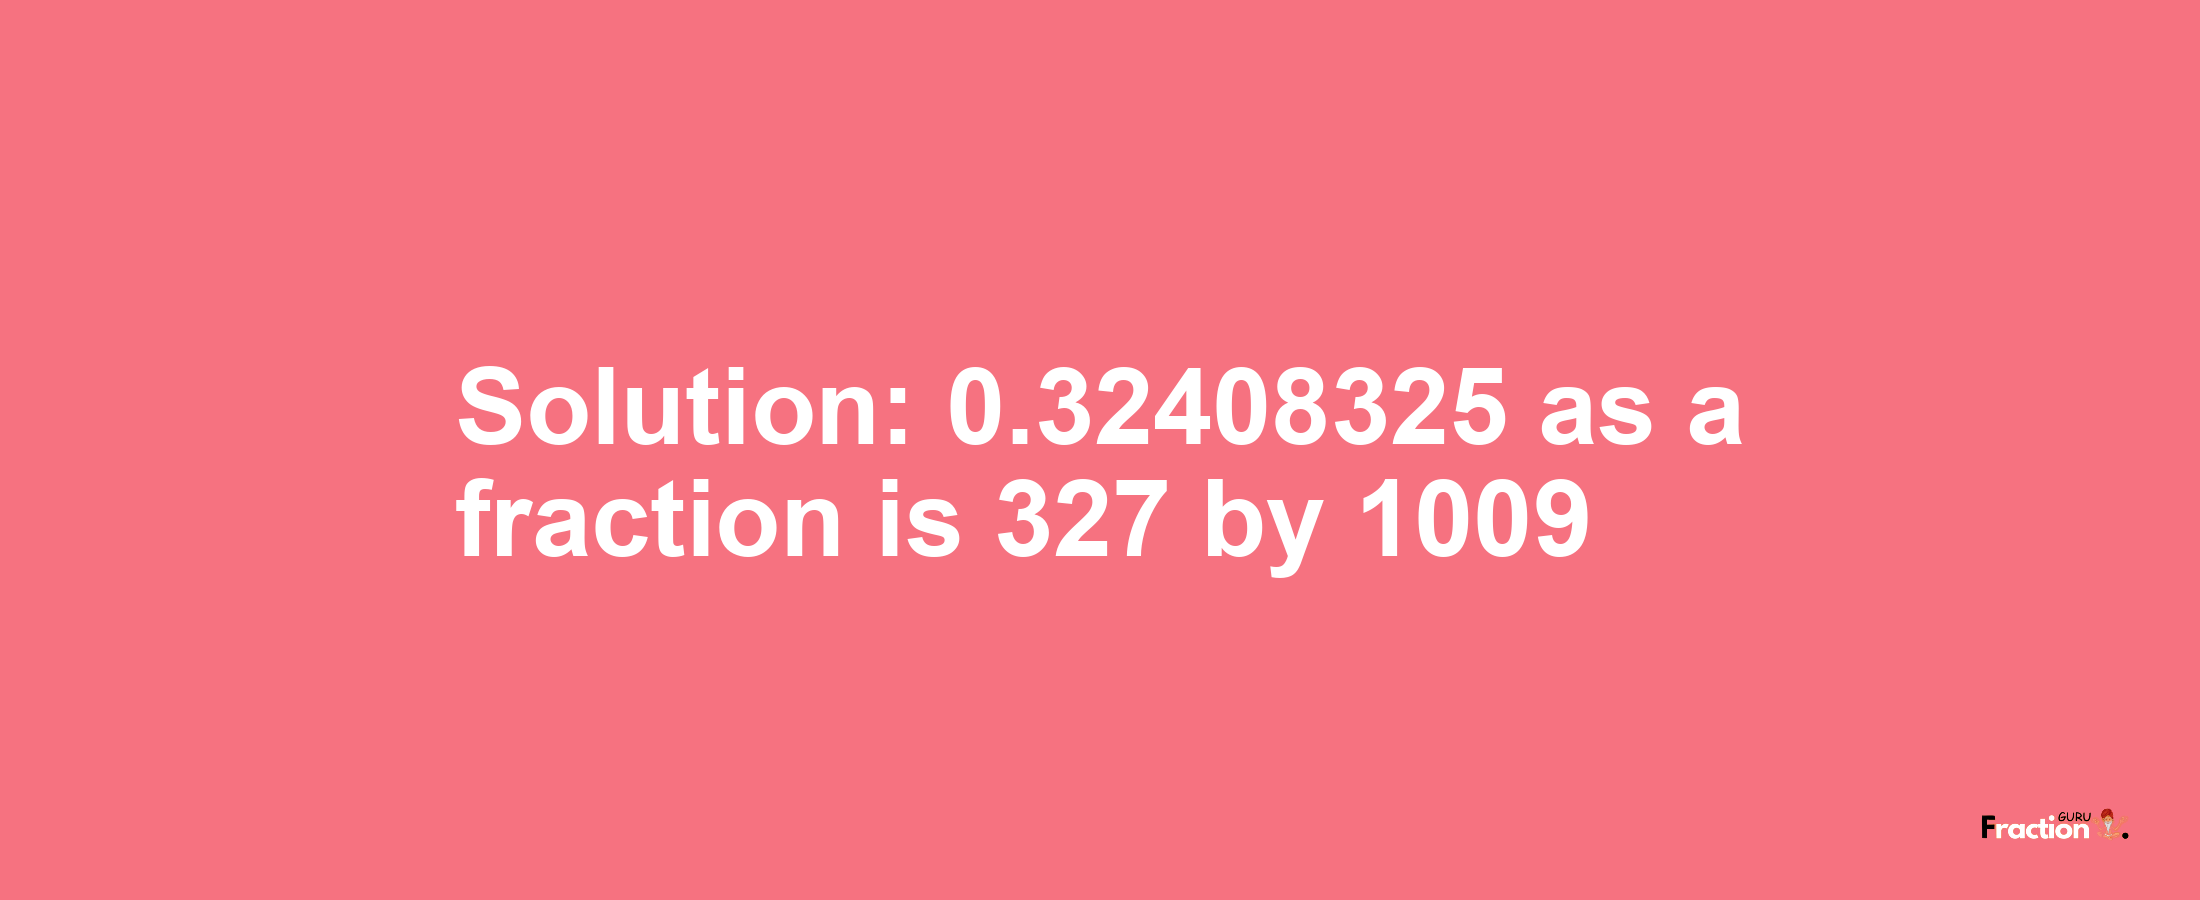 Solution:0.32408325 as a fraction is 327/1009